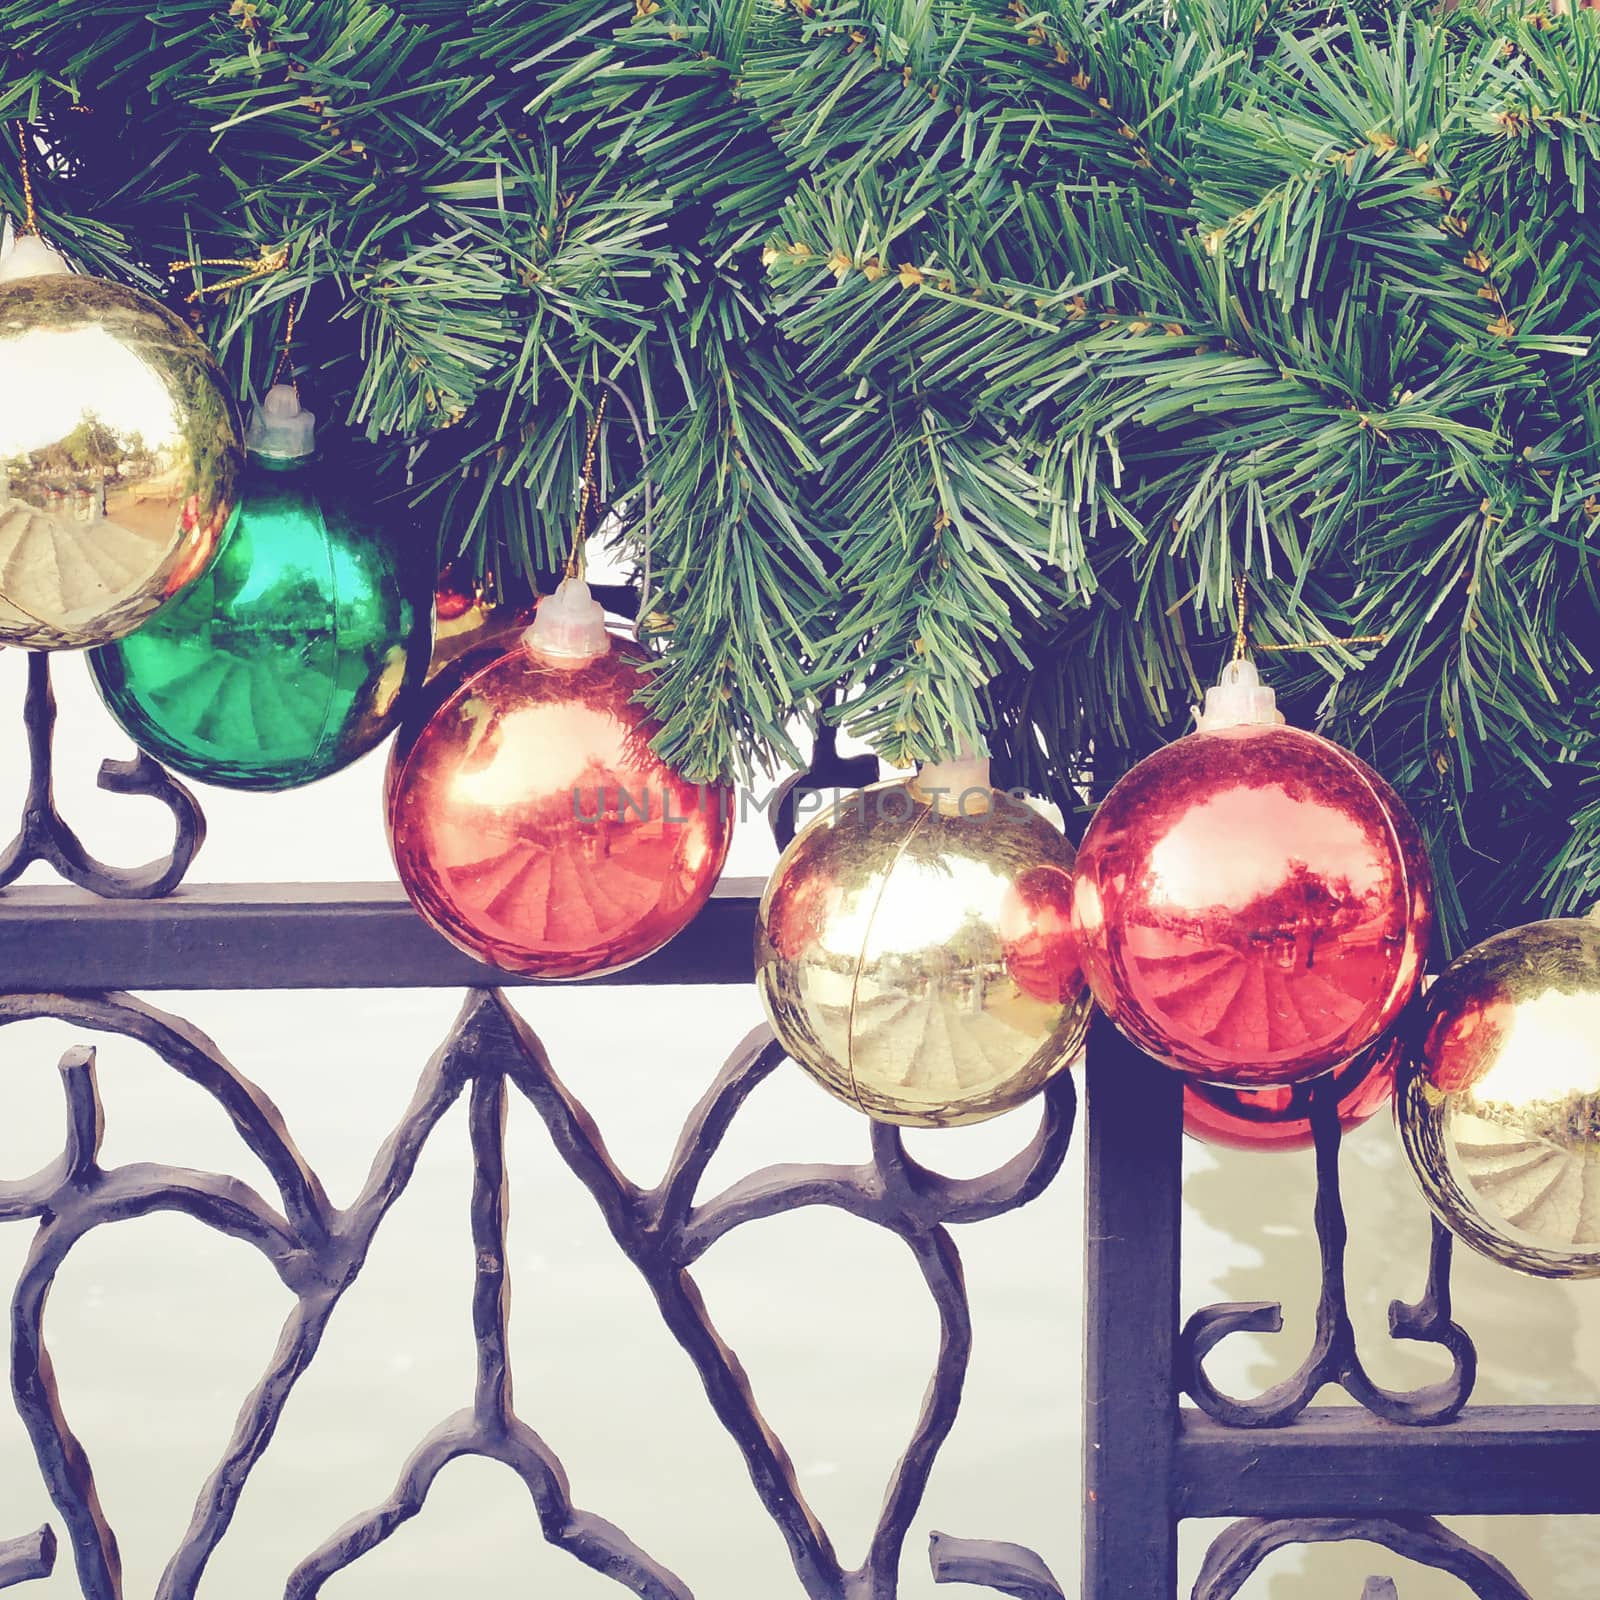 Christmas balls hanging on fir tree with retro filter effect